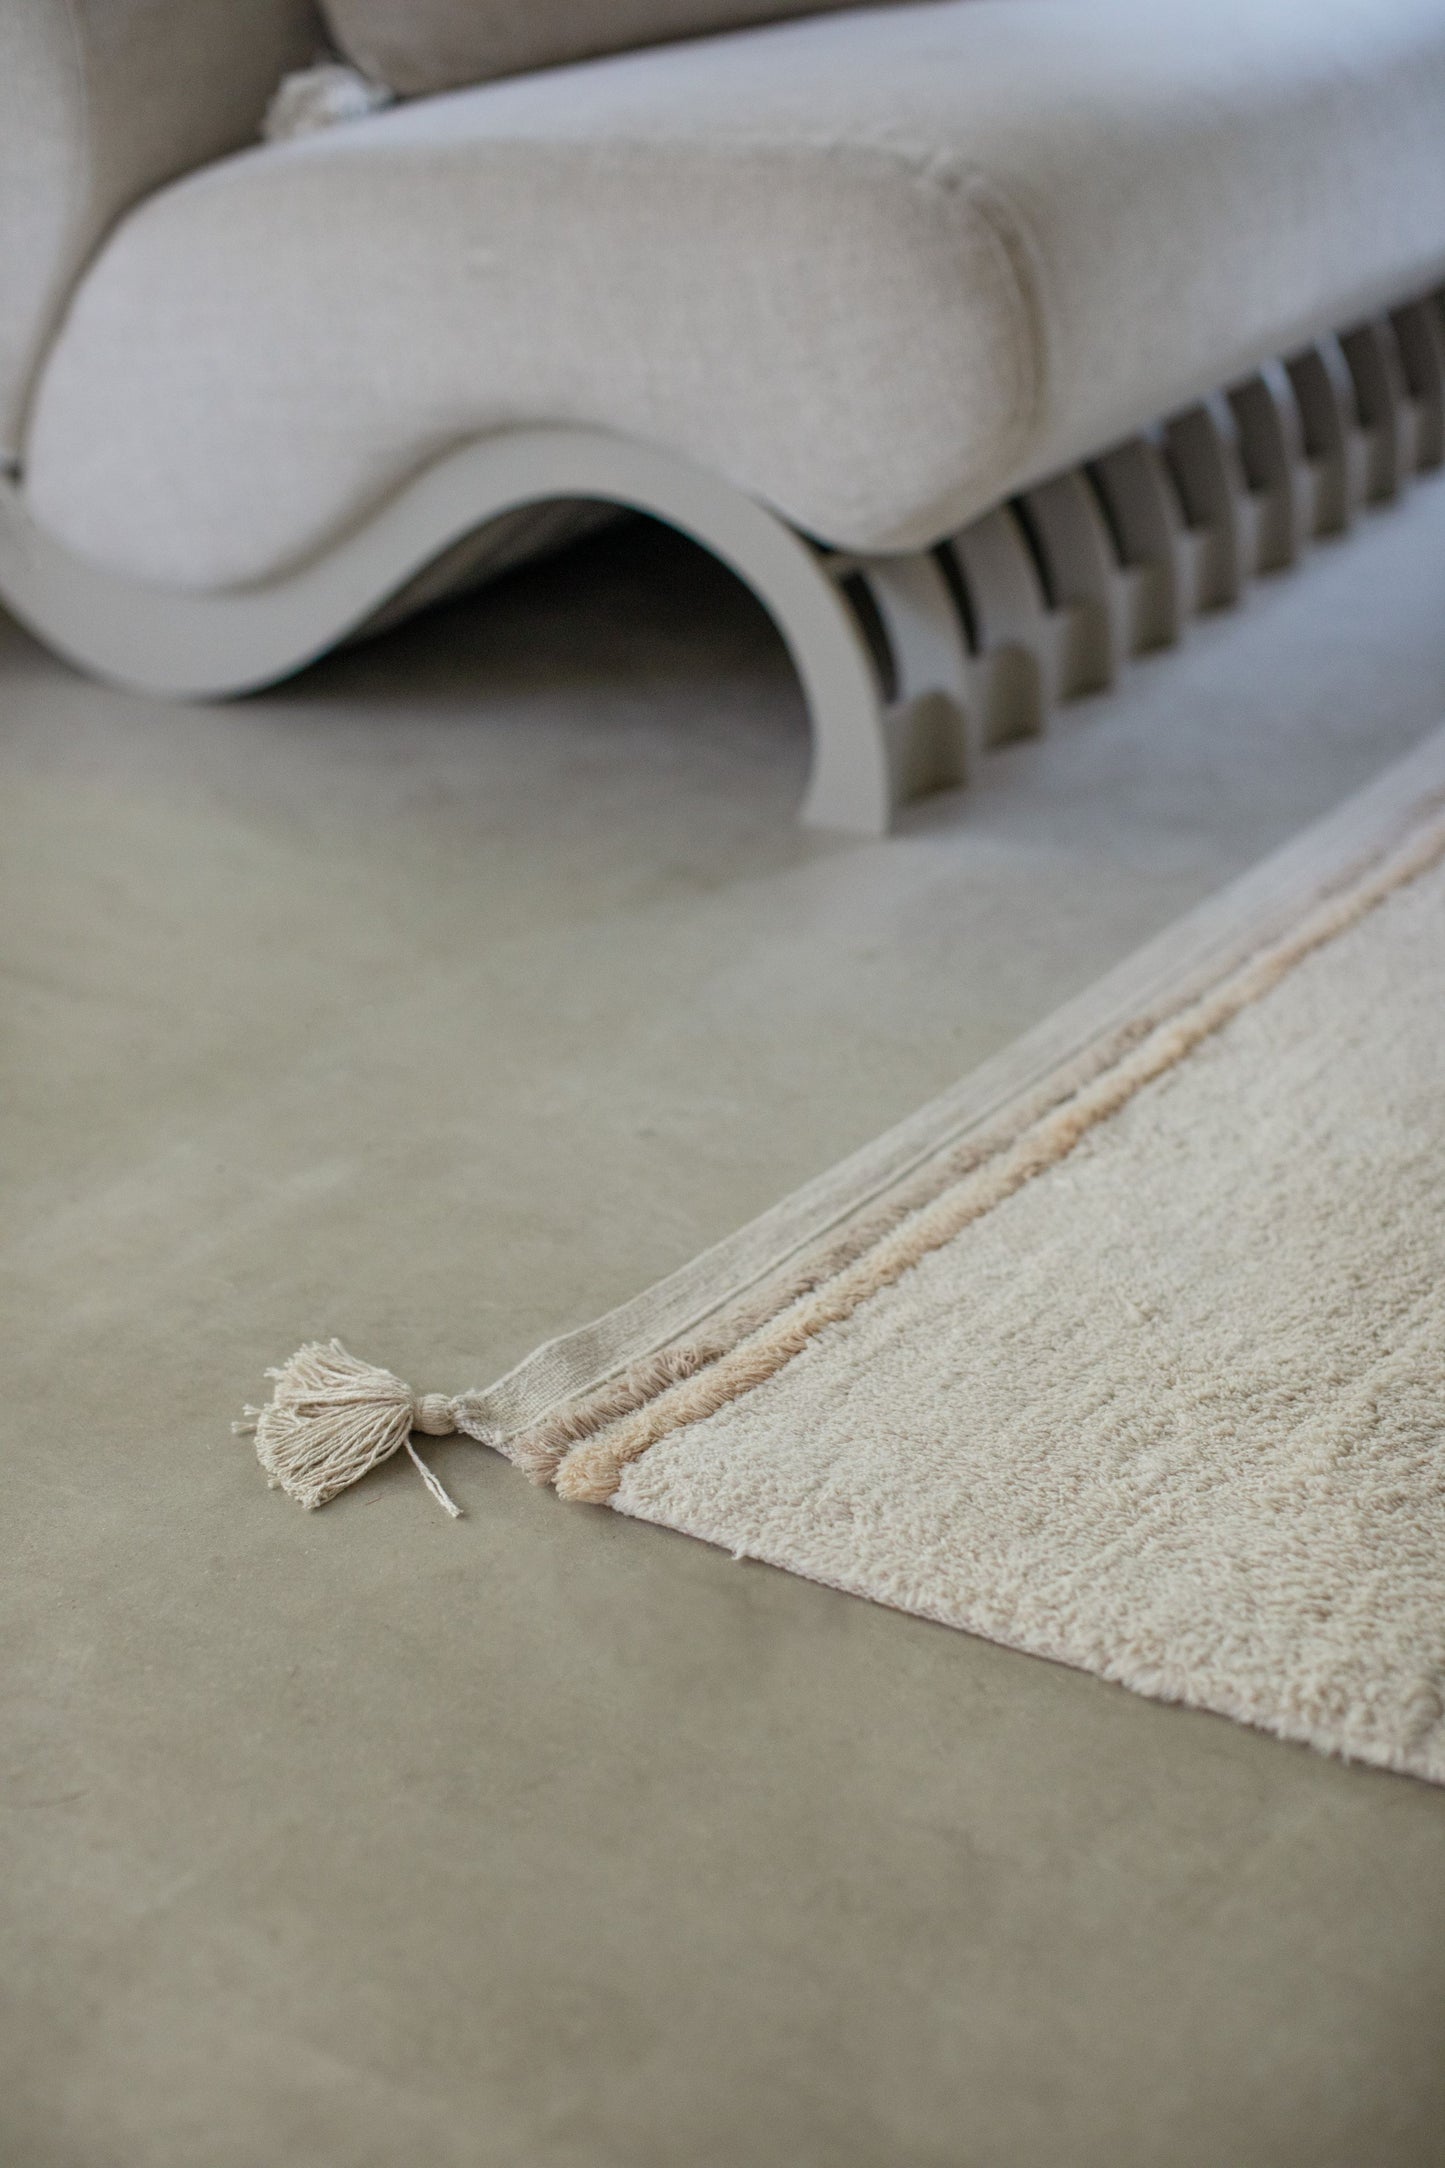 Lorena Canals Washable cotton rug - Bloom Natural S - 120x160cm